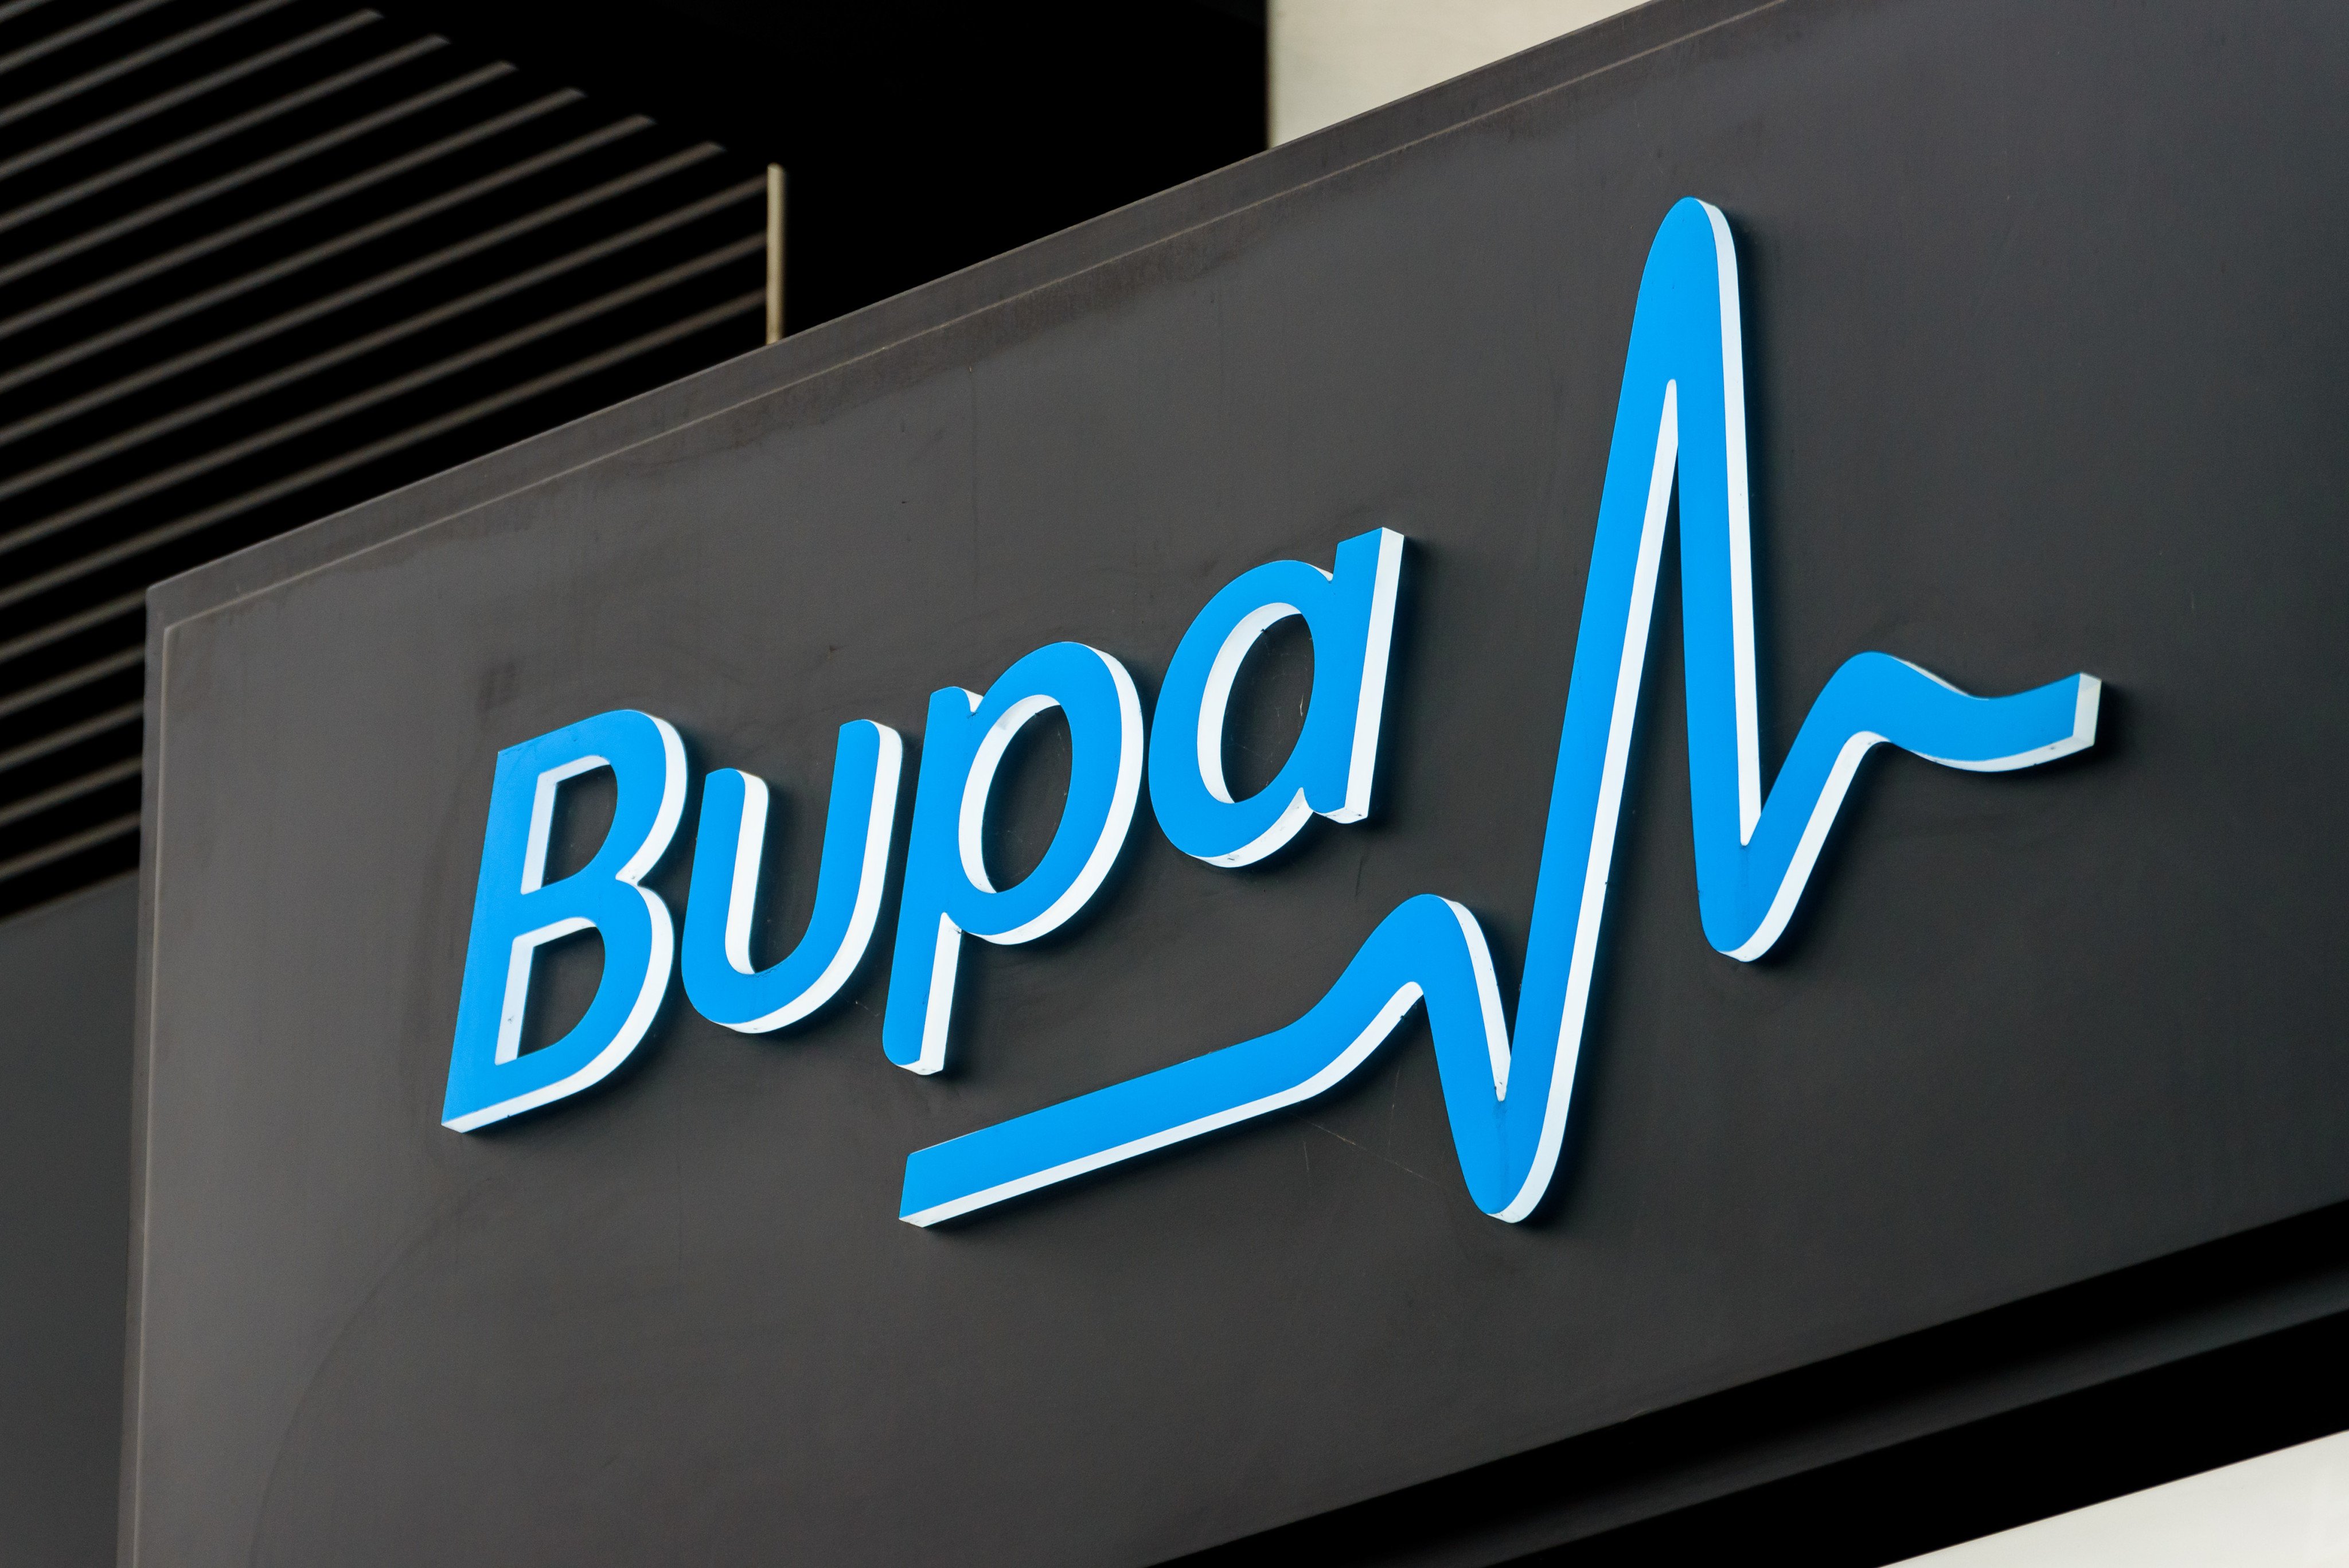 Bupa included a nephrologist, dermatologist, orthopaedist and general practitioner on its “unrecognised providers in Hong Kong” list. Photo: Shutterstock